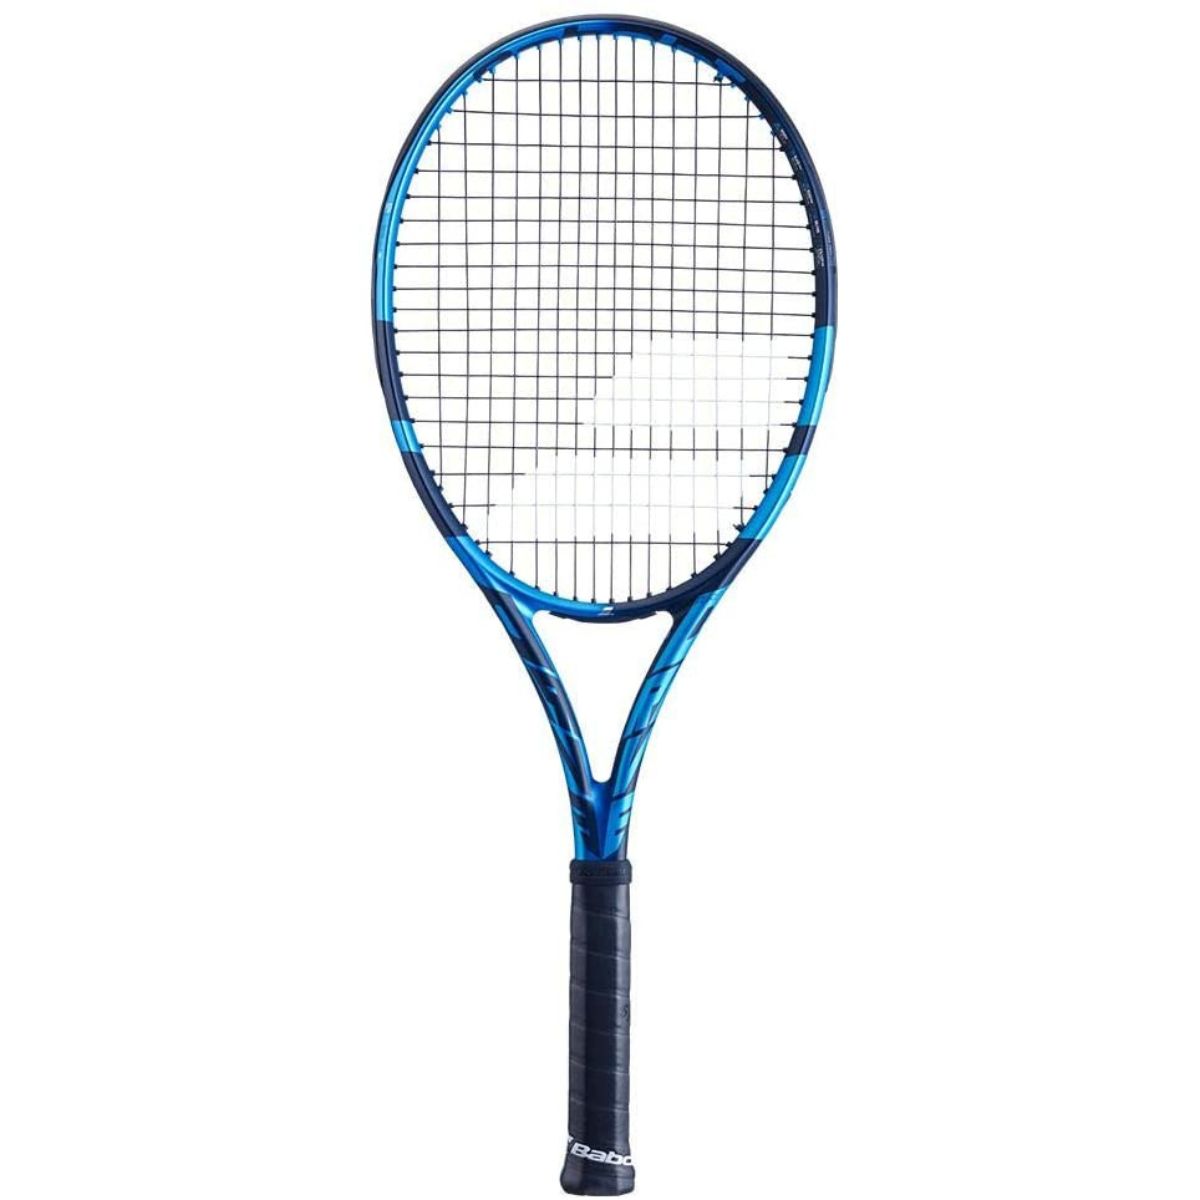 The Best Tennis Rackets for Doubles Options: Babolat Pure Drive